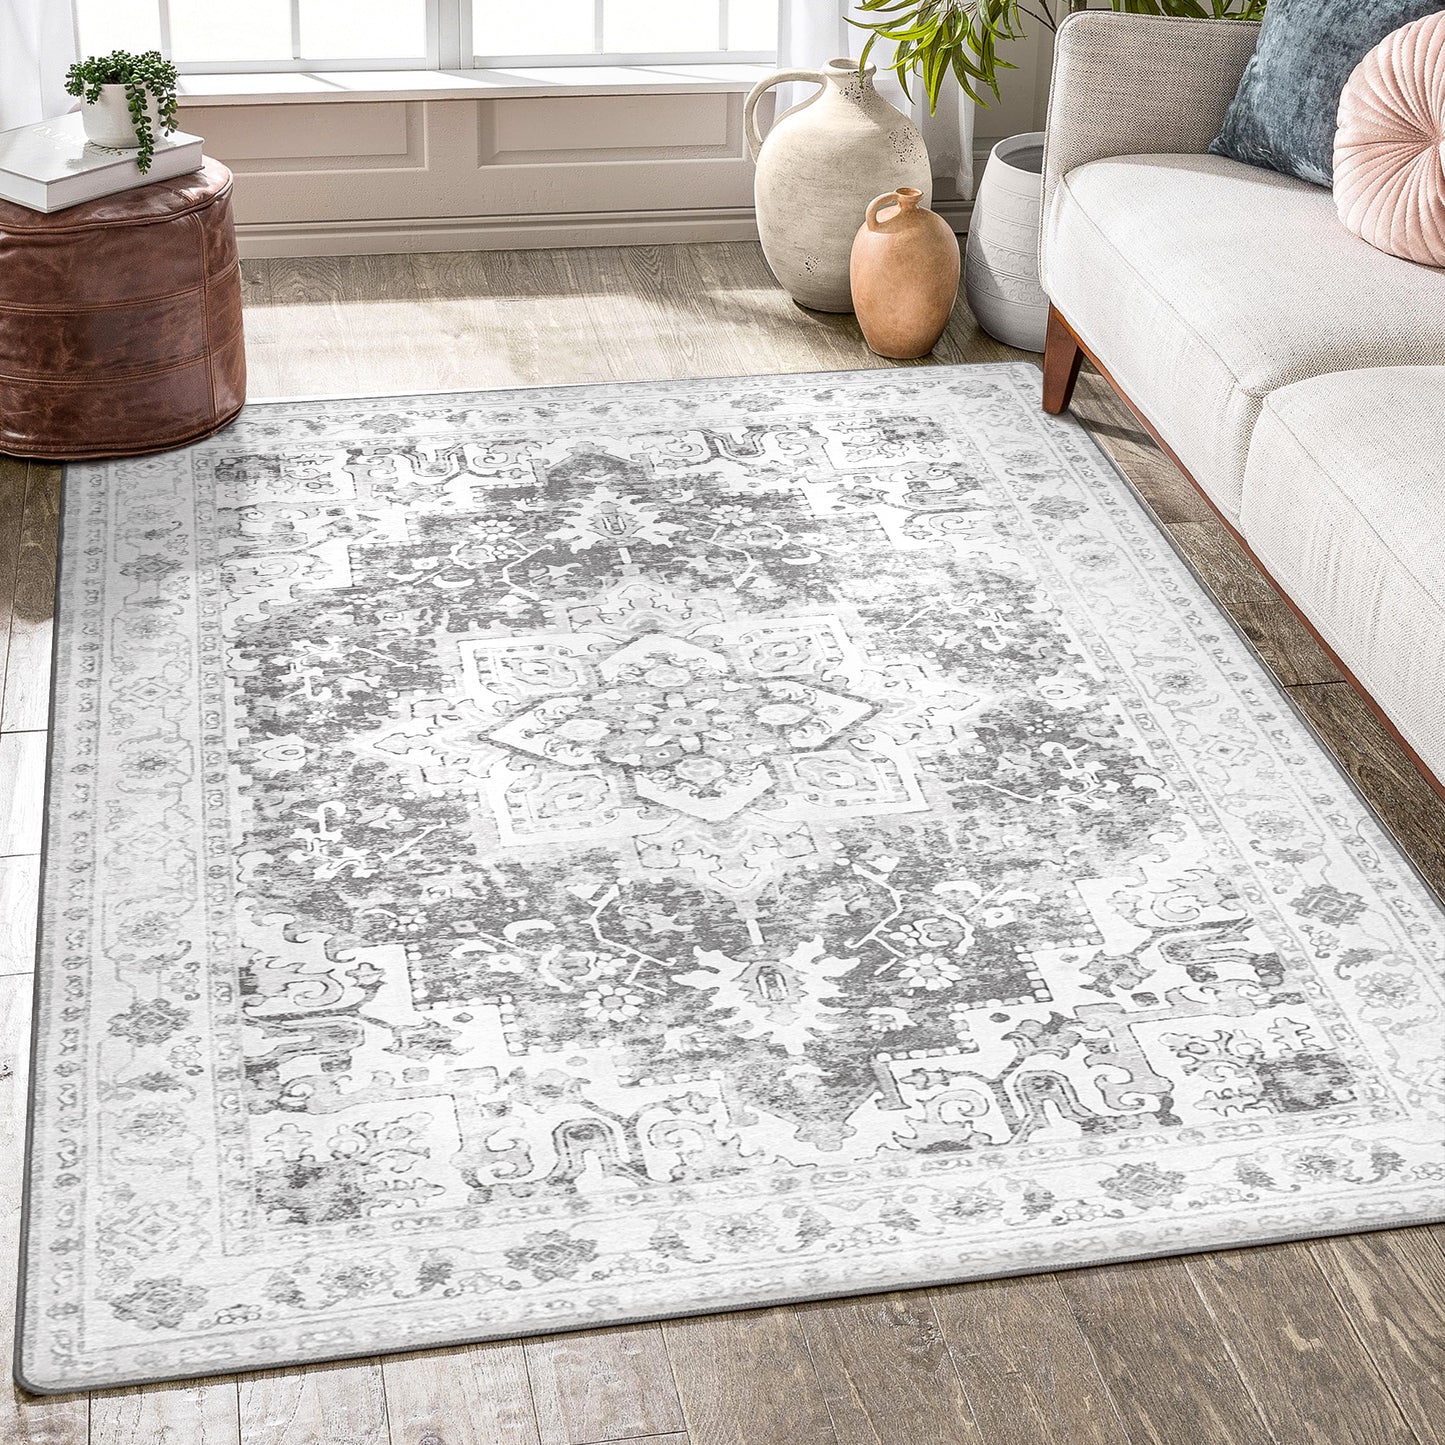 GENIMO Area Rug Non Slip Rug, Machine Washable Low Pile Rugs for Living Room, Entryway, Bedroom, Kitchen and Corridor